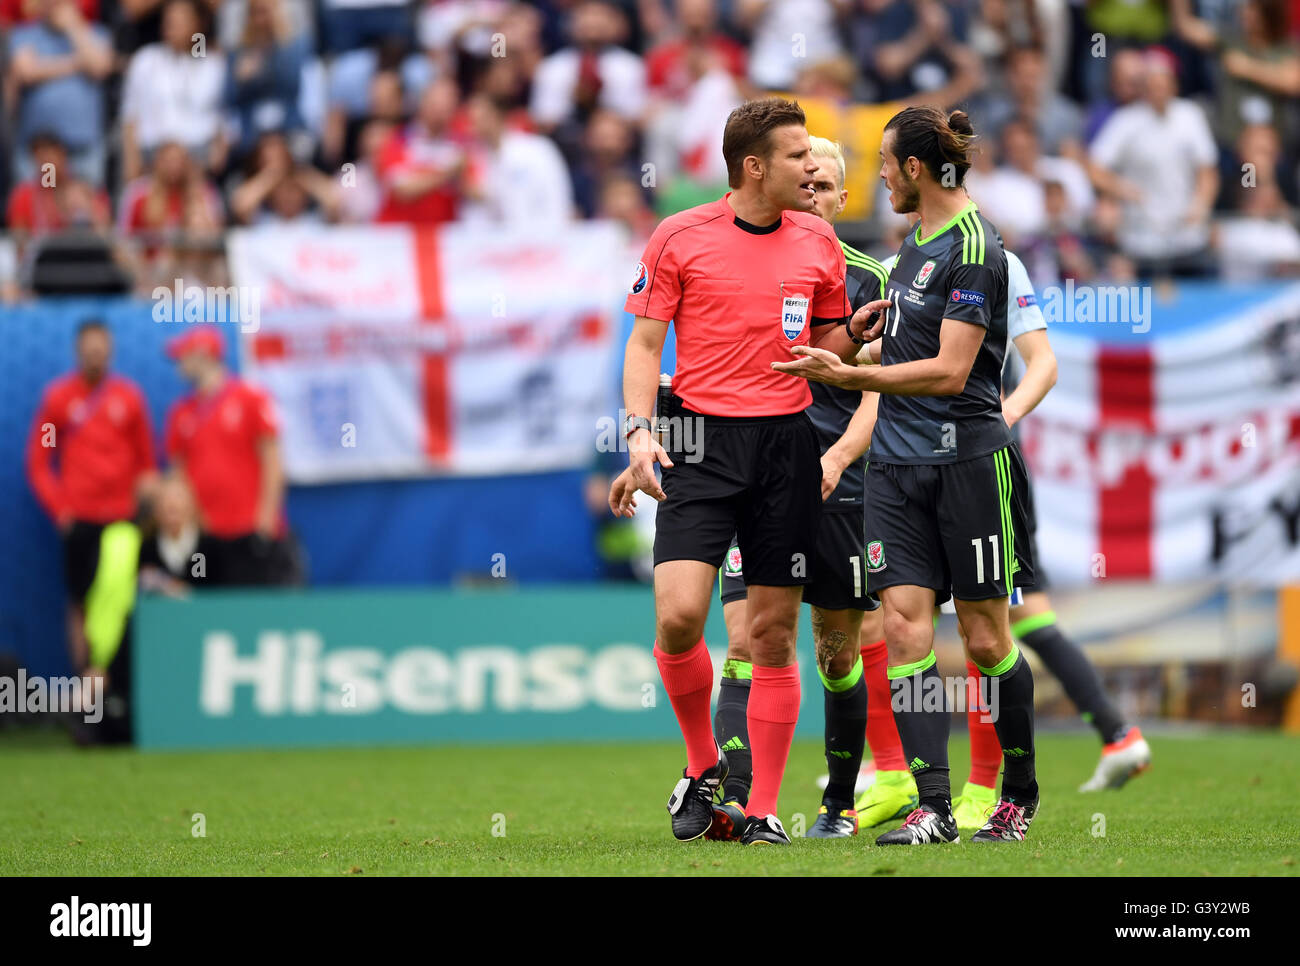 Lens, France. 16th June, 2016. Gareth Bale (R) of Wales speaks with referee Felix Brych of Germany after England scored the equalizer during the Euro 2016 Group B soccer match between England and Wales at the Stade Bollaert-Delelis stadium, Lens, France, June 16, 2016. Photo: Marius Becker/dpa/Alamy Live News Stock Photo